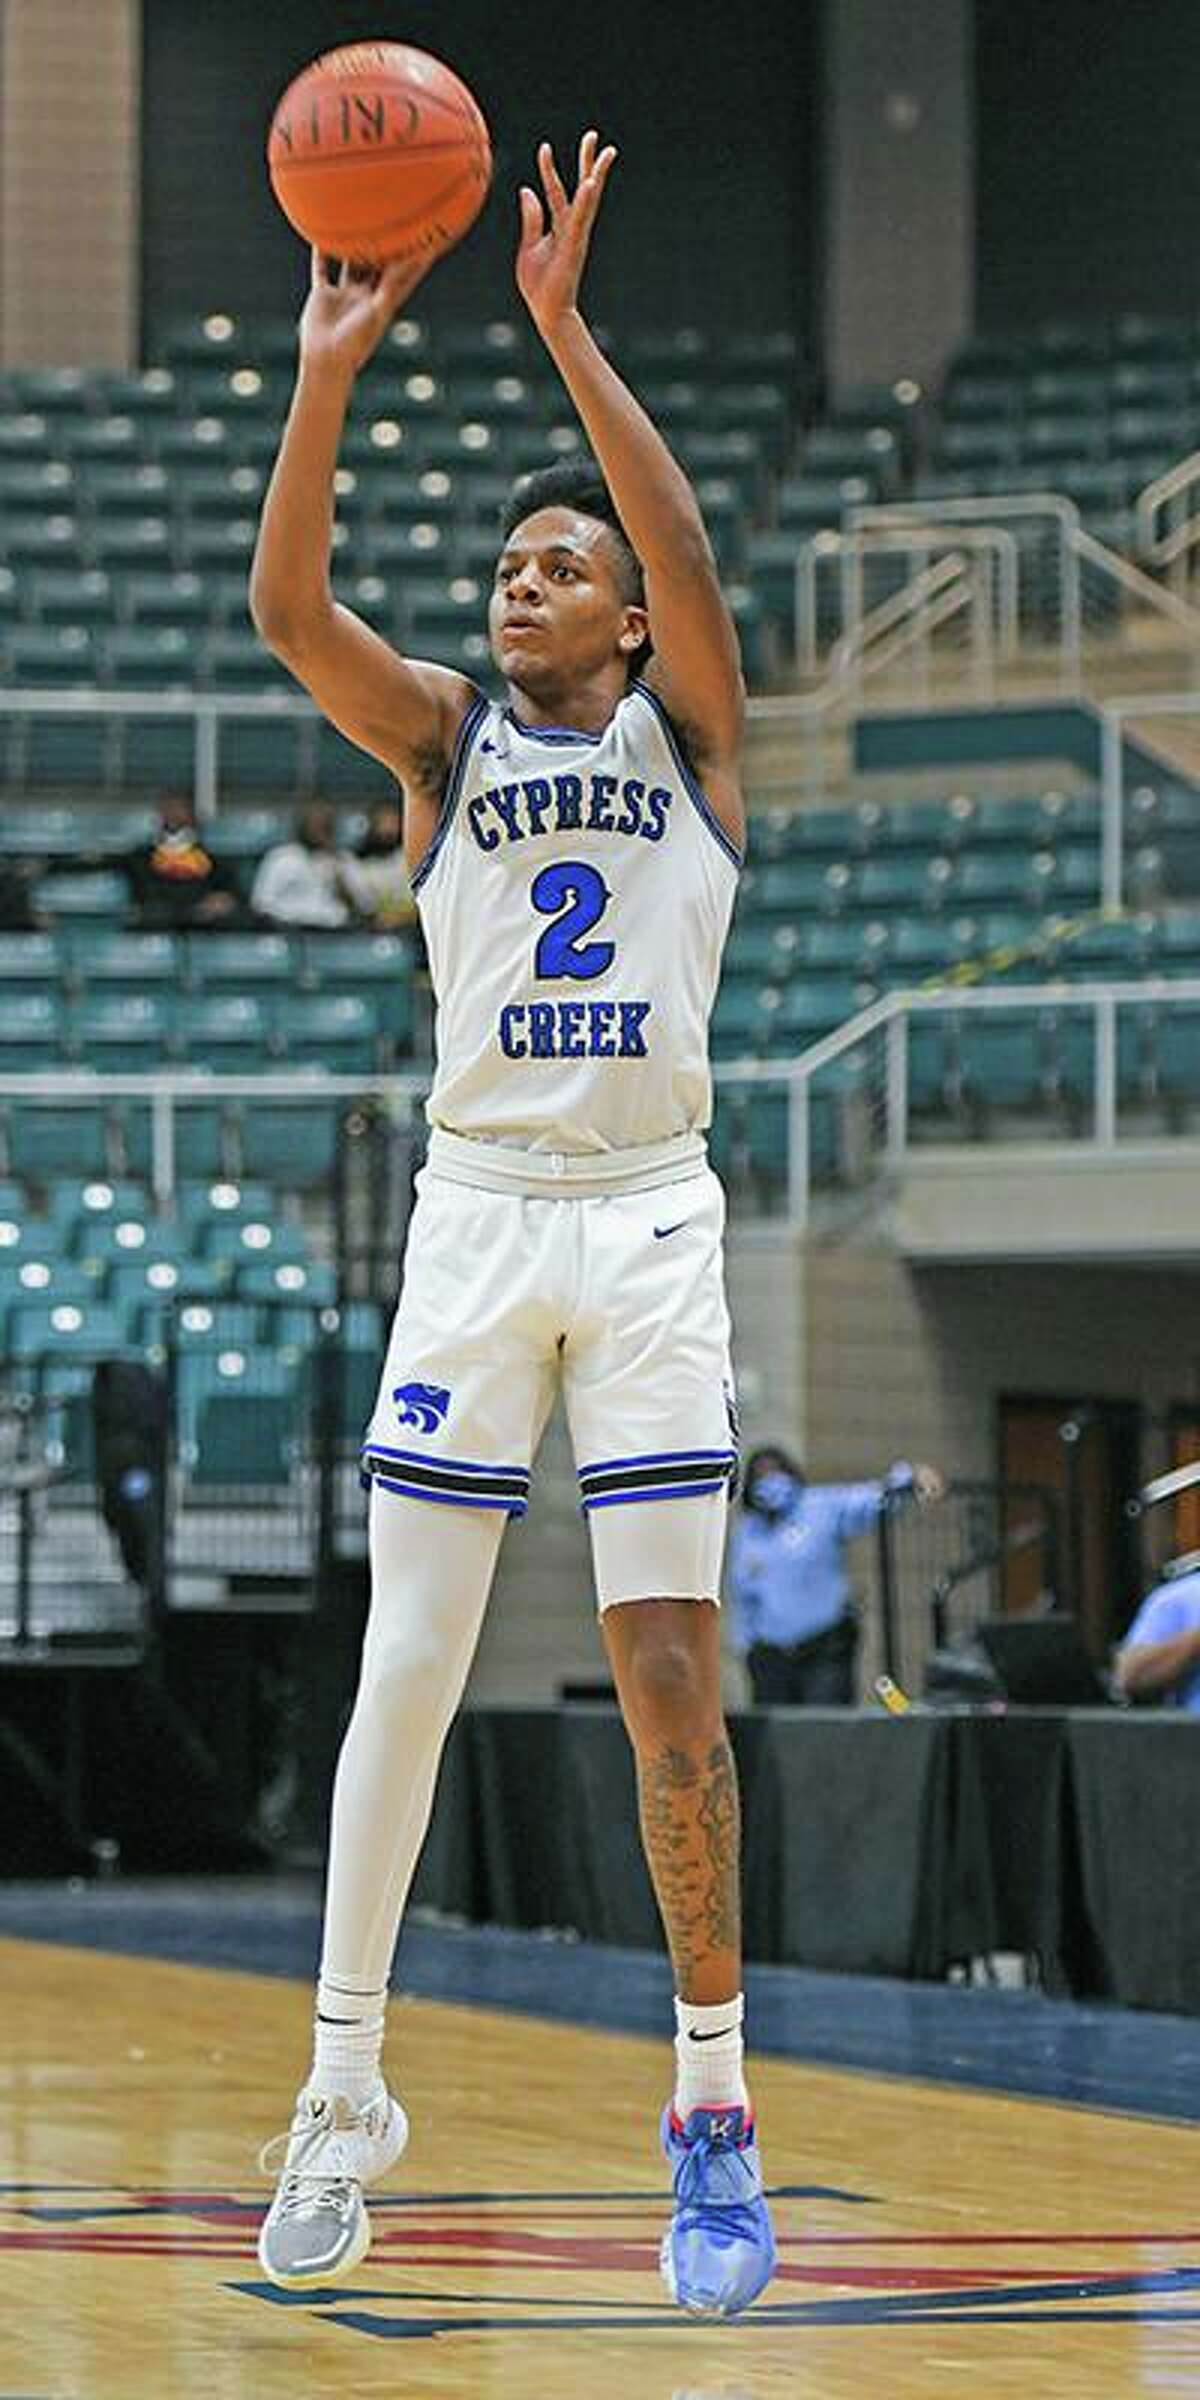 The Greater Houston Basketball Committee announced 11 finalists for the 2021 Guy V. Lewis Award in a press release Thursday, March 4. Among the finalists was Cy Creek senior guard DJ Richards.